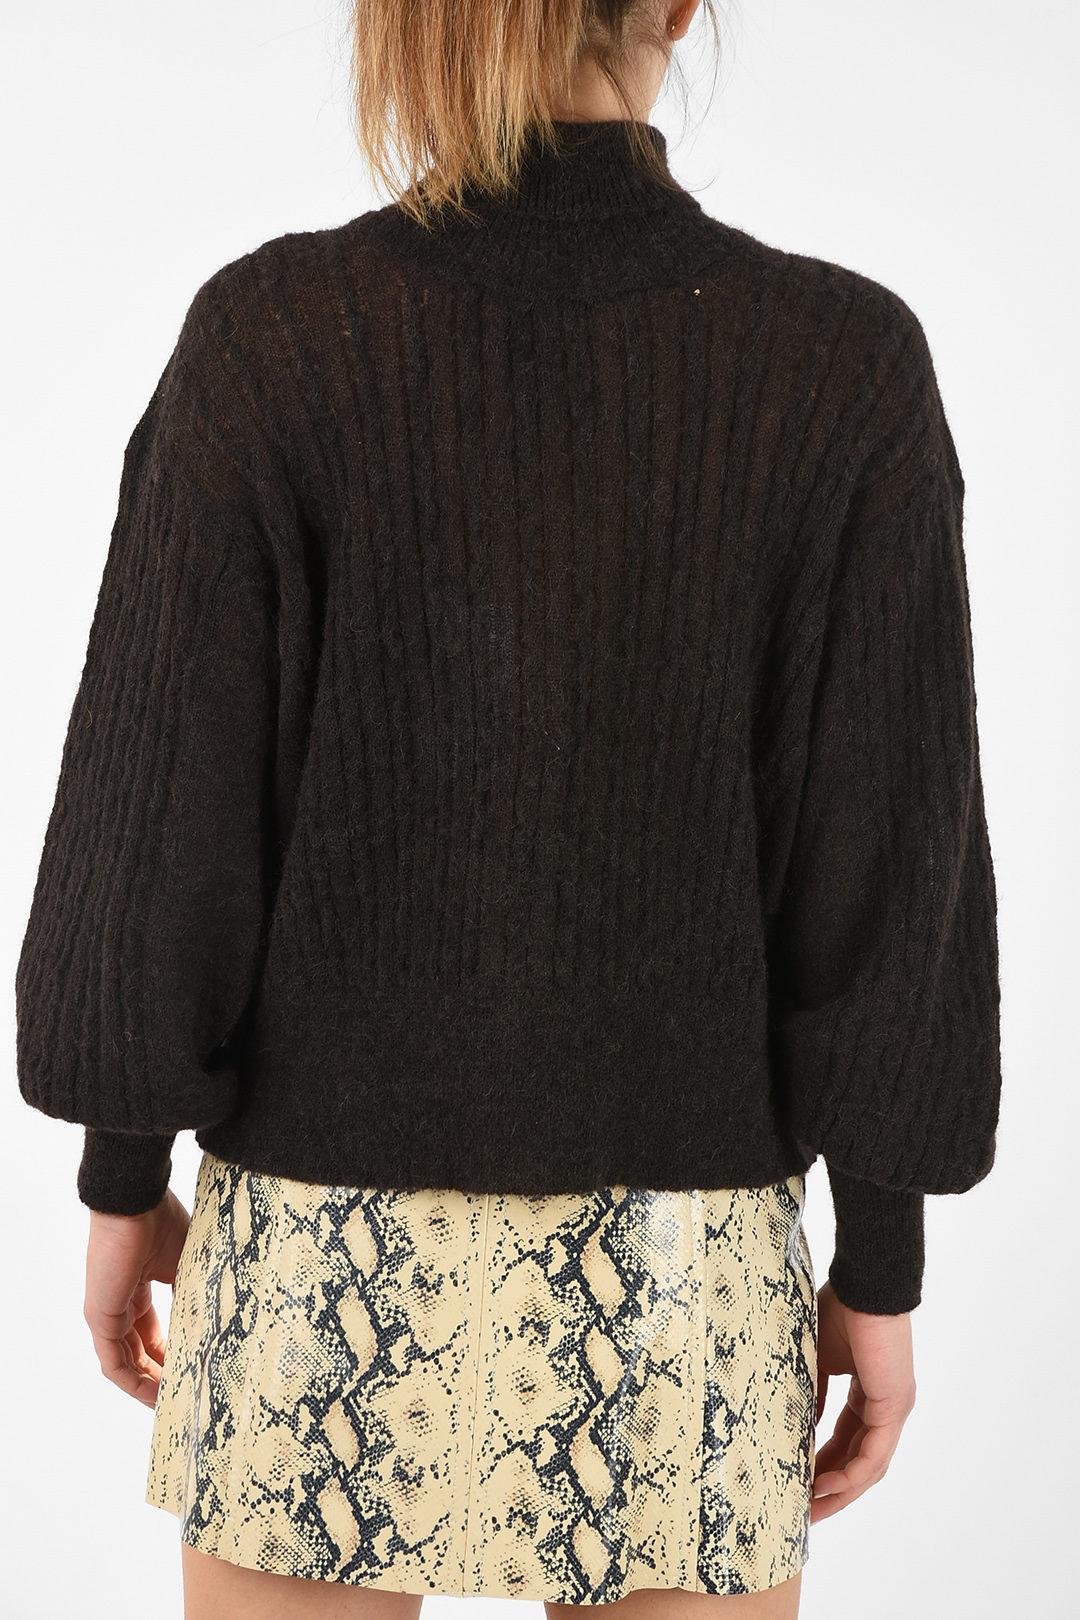 Maison Flaneur turtle neck cable knit Sweater women - Glamood Outlet